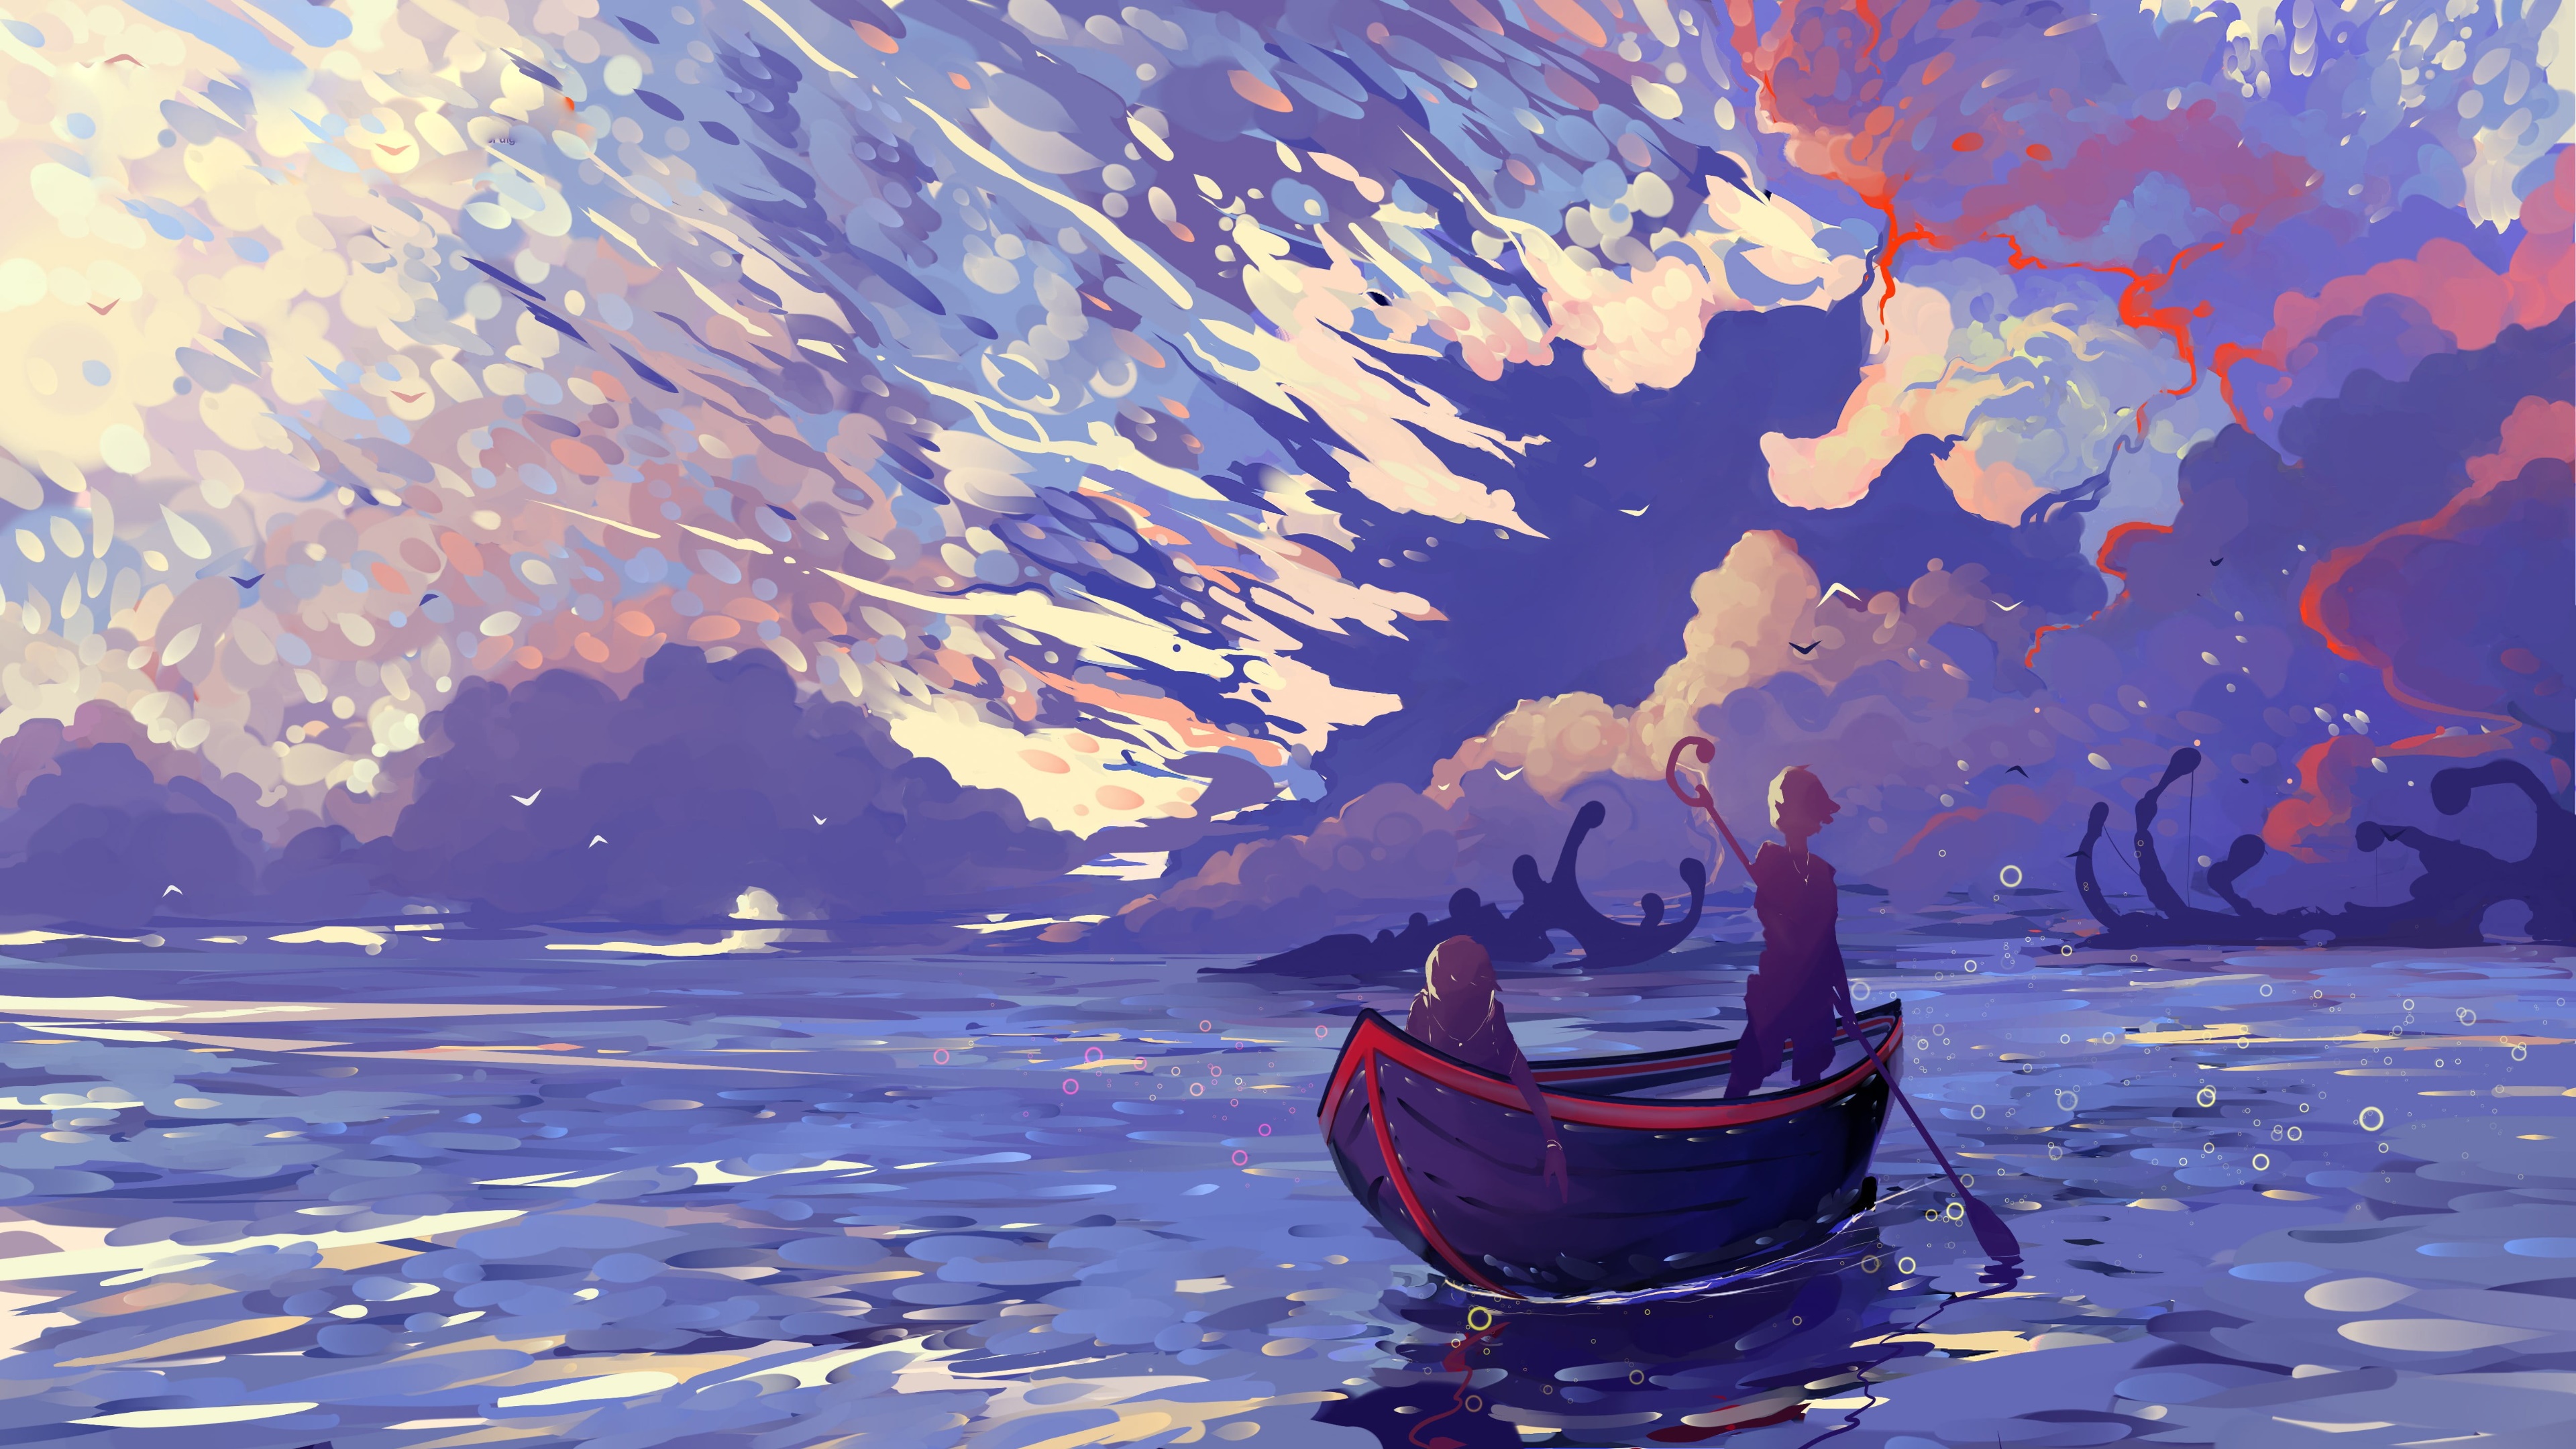 Anime 3840x2160 fantasy art boat water clouds sky